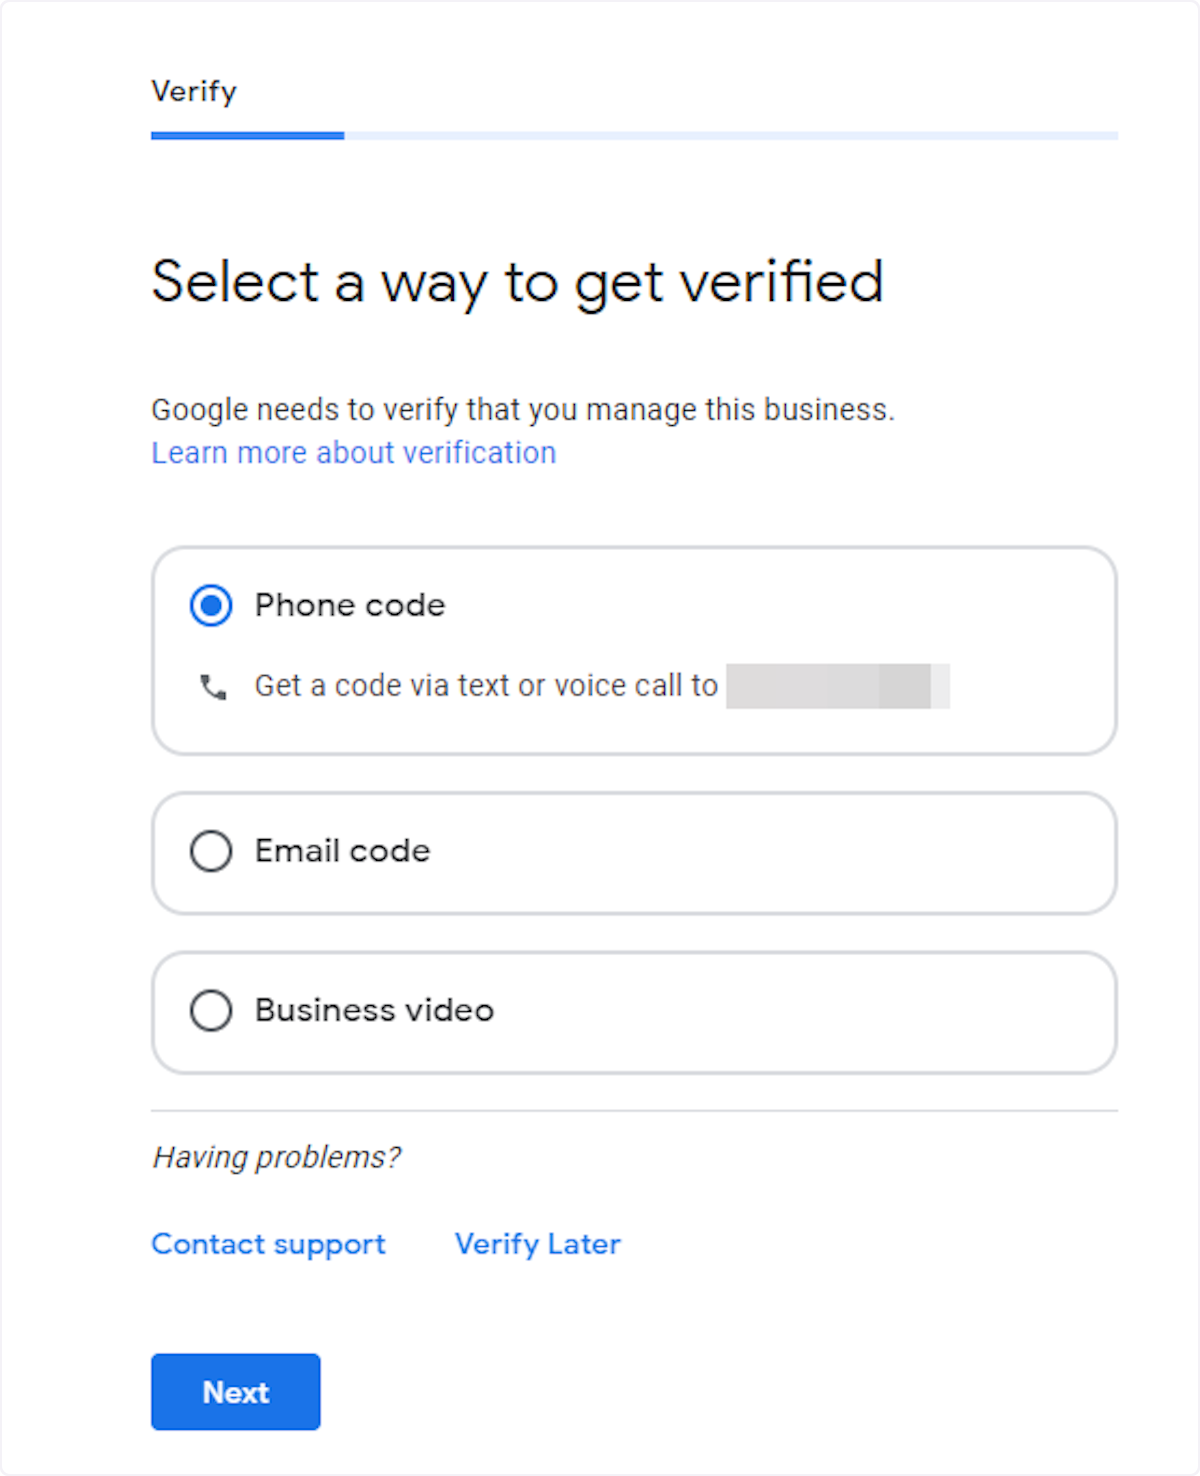 After entering your mailing address, you will select a way to get verified. 